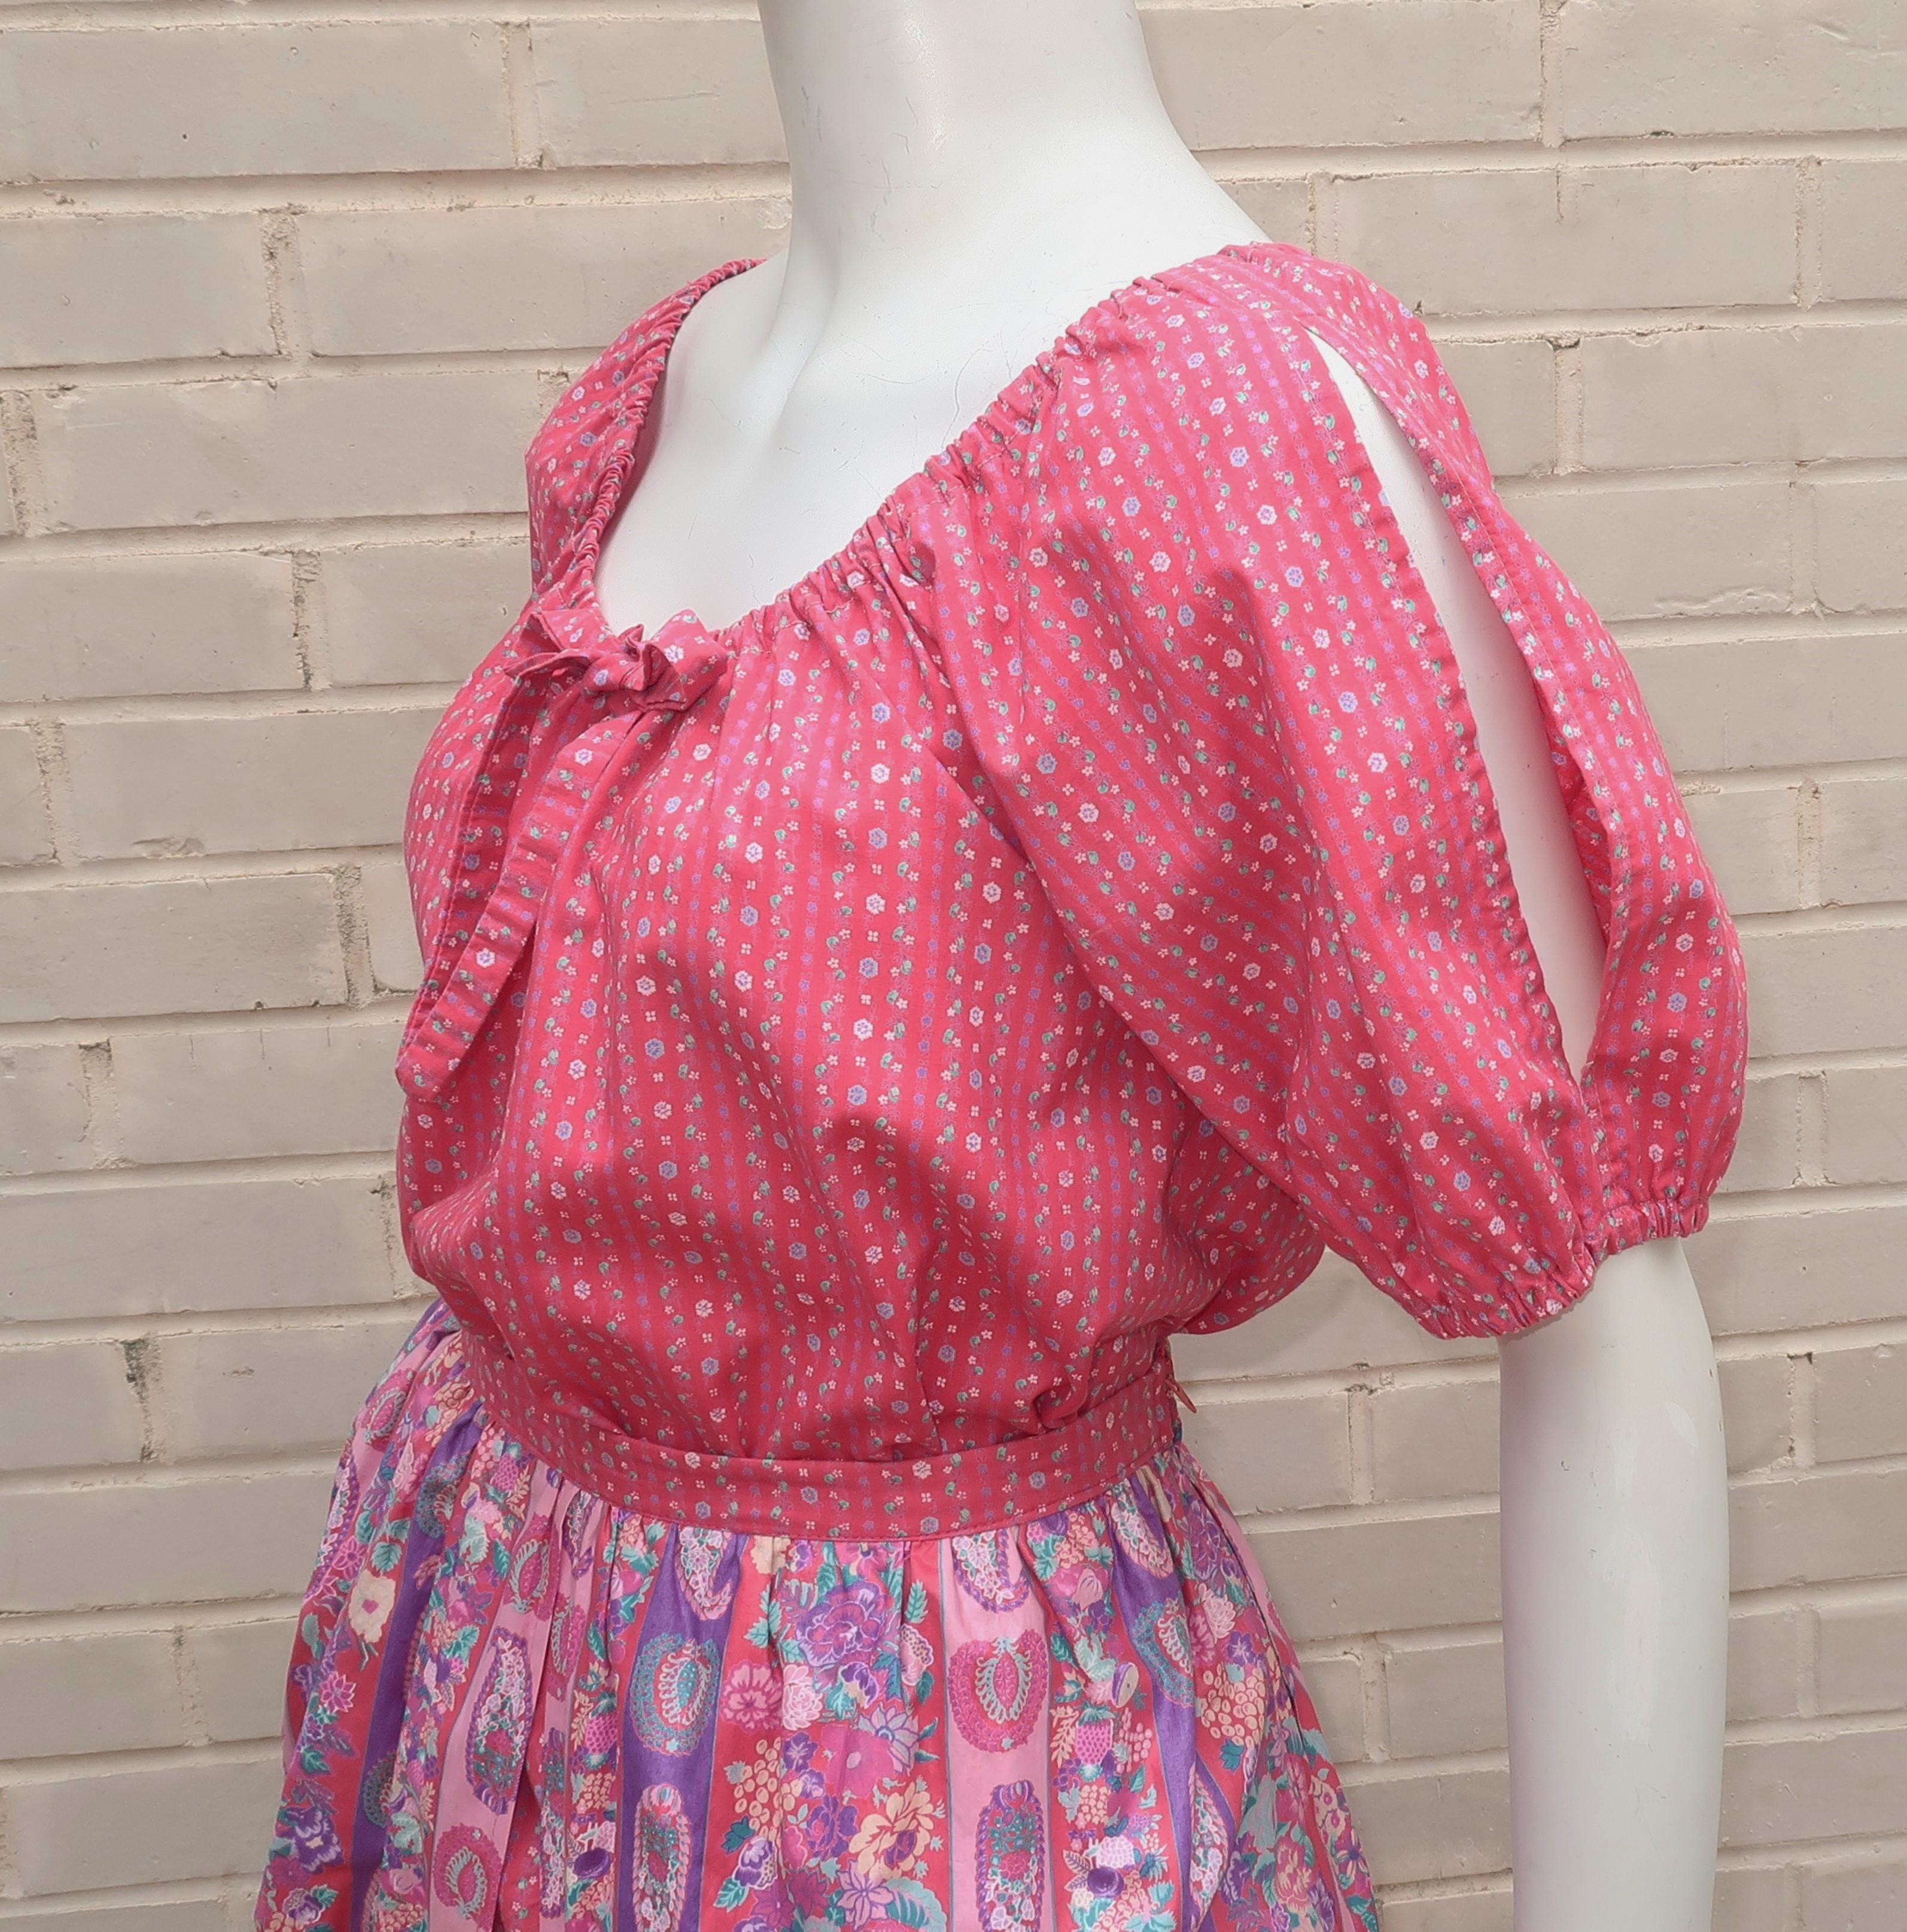 Belle France Floral Cotton Peasant Top & Skirt Dress, 1970's In Good Condition For Sale In Atlanta, GA